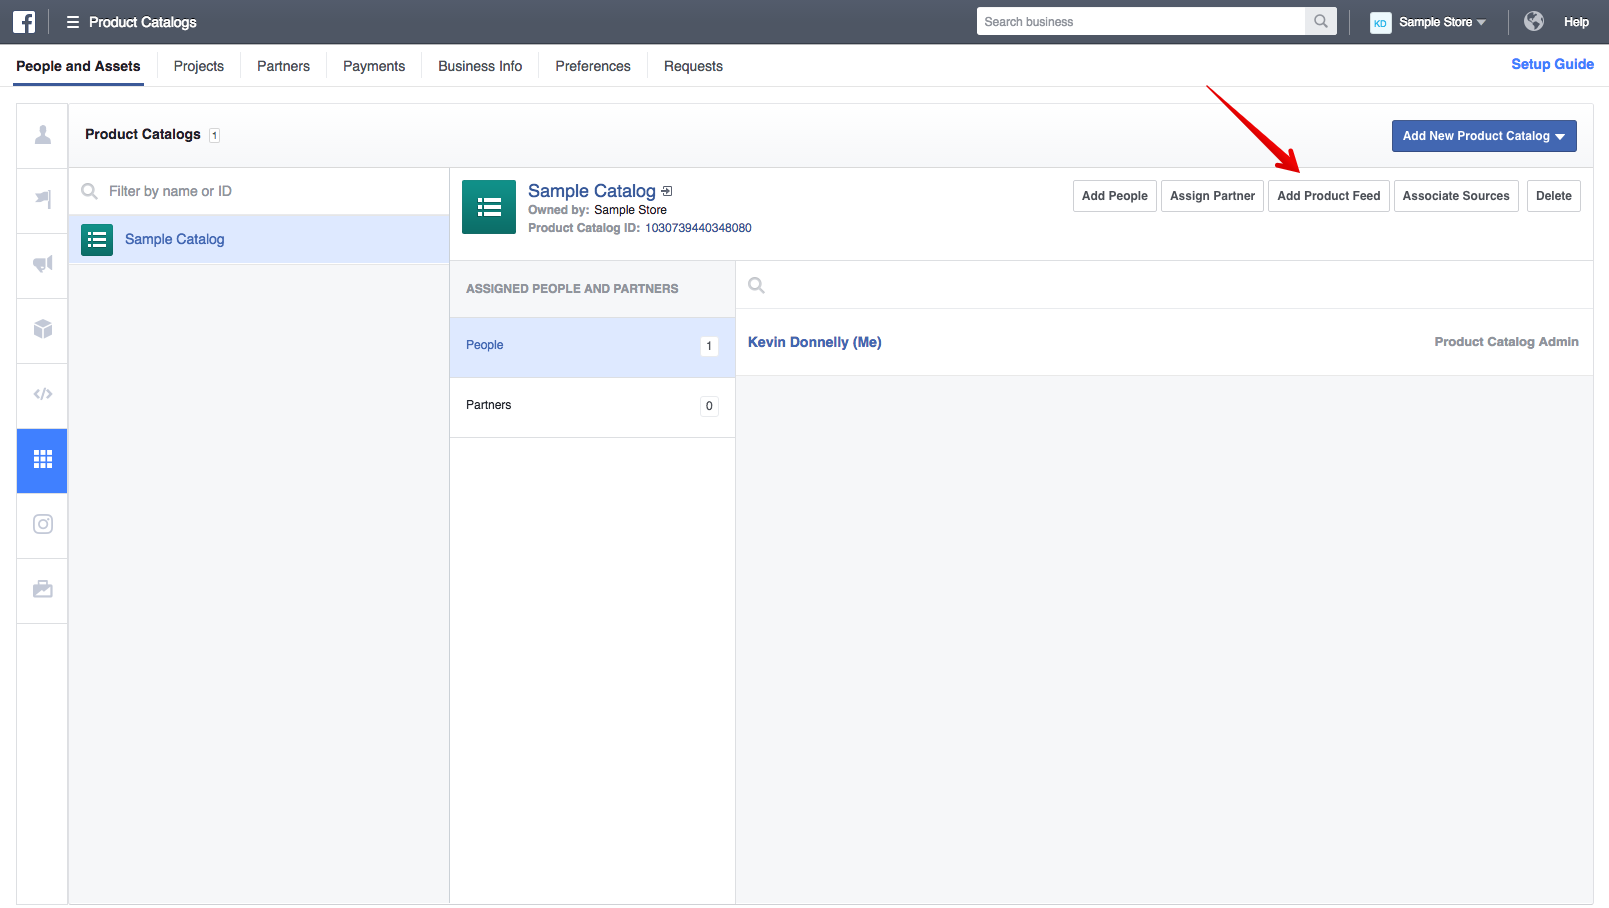 The Add Product Feed button is highlighted in Meta Business Manager.